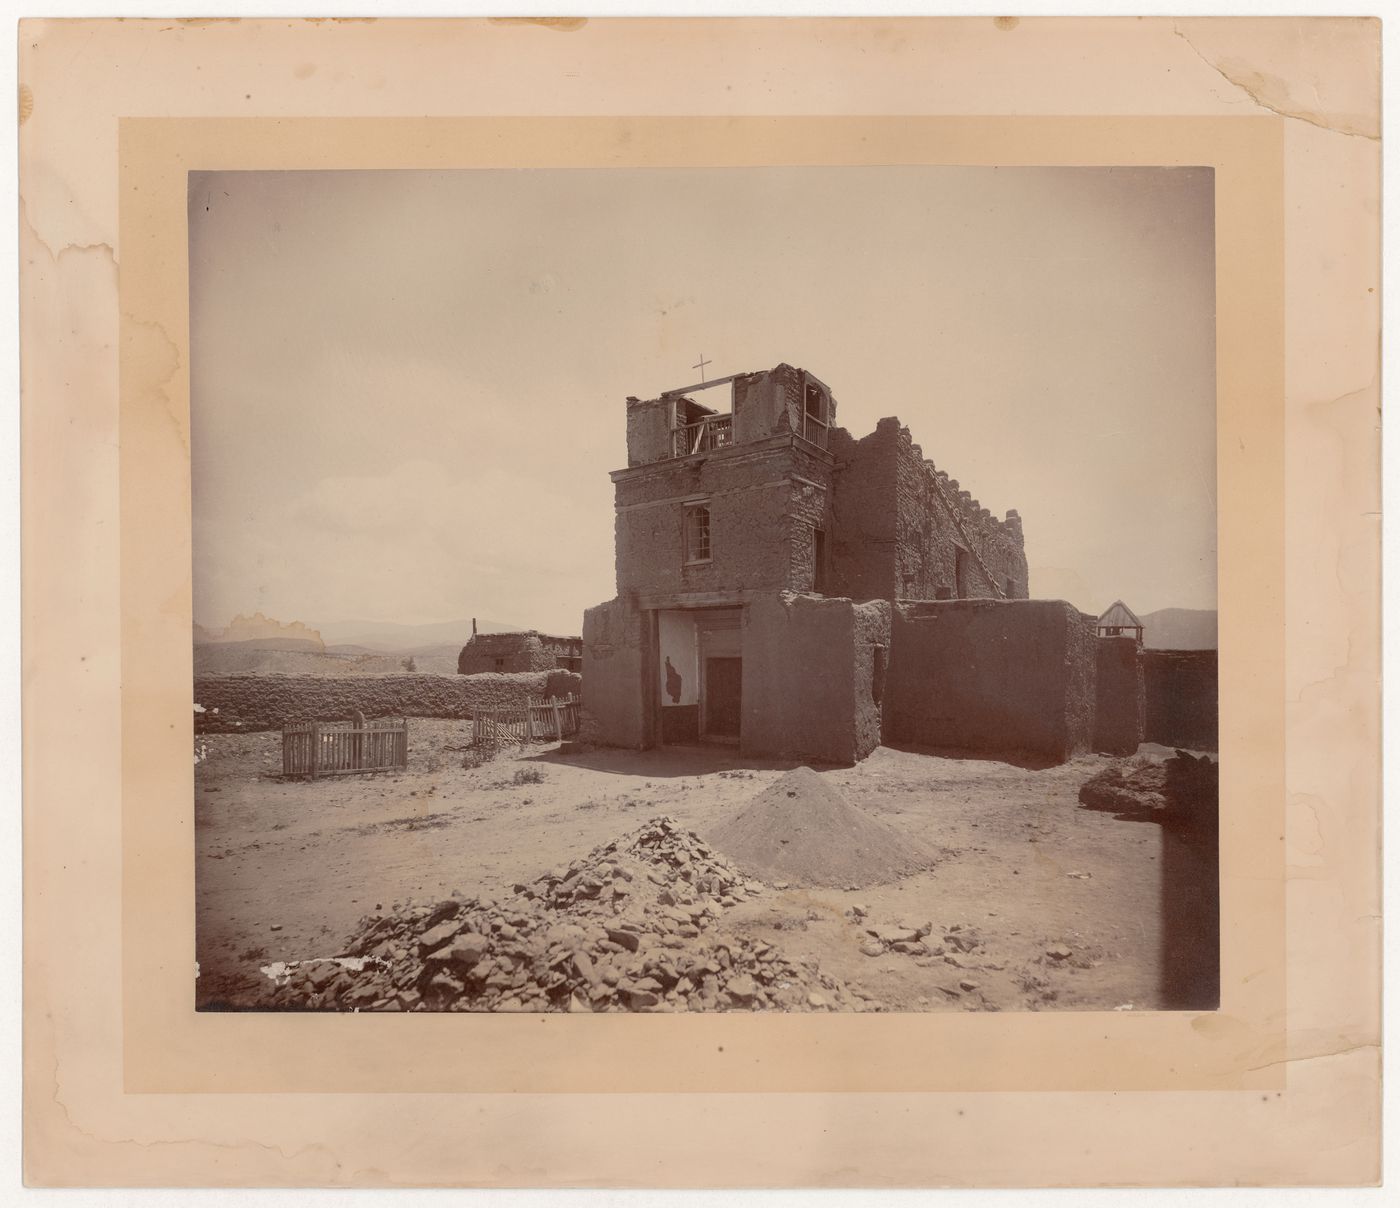 View of the Church of San Miguel showing the damaged principal façade and tower, Santa Fe, New Mexico, United States